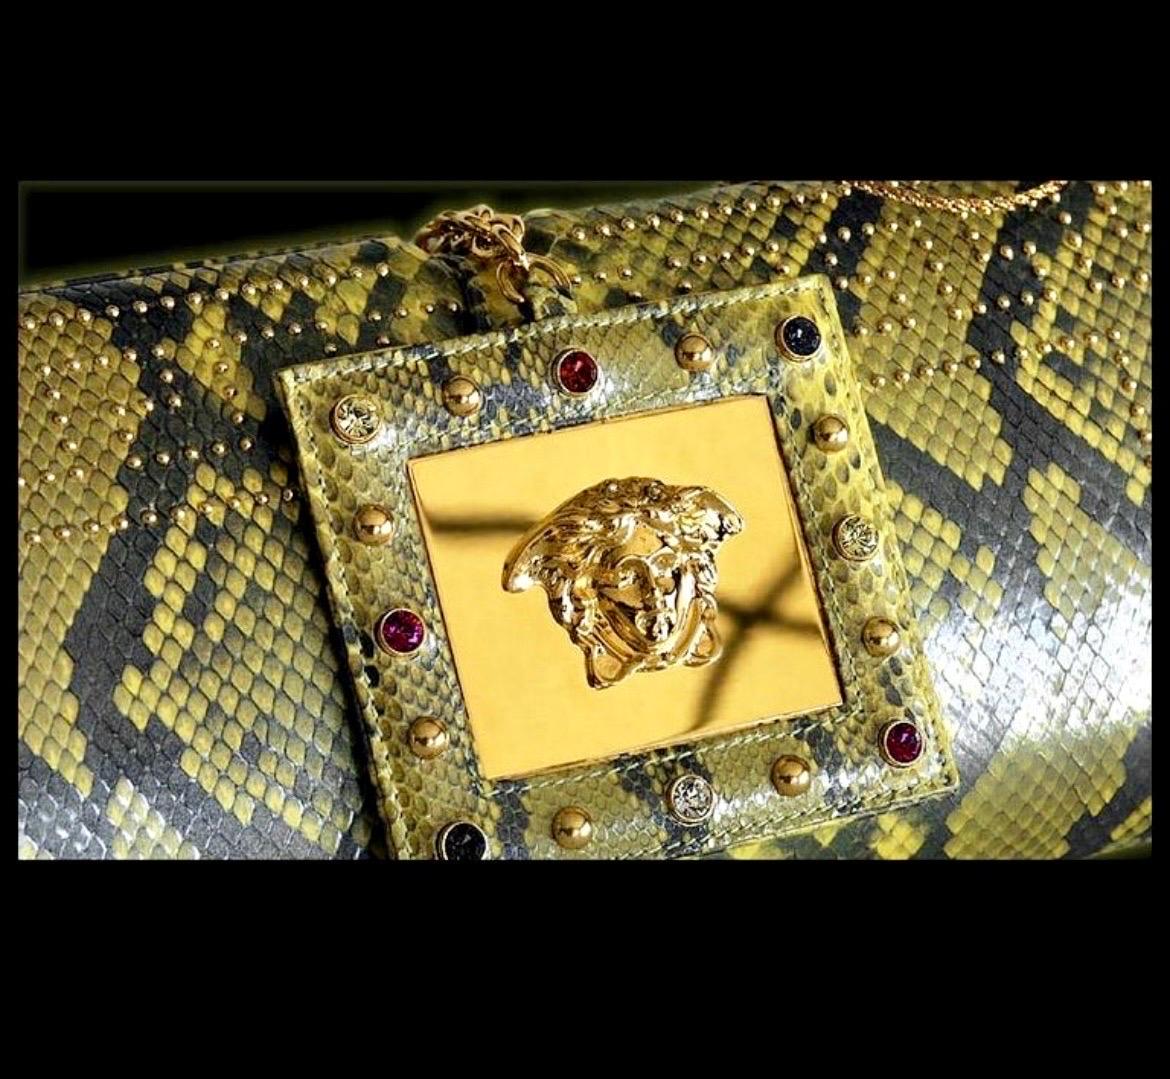 S/S 2000 Vintage Gianni Versace Runway Embellished Python Clutch Bag In Excellent Condition For Sale In Montgomery, TX